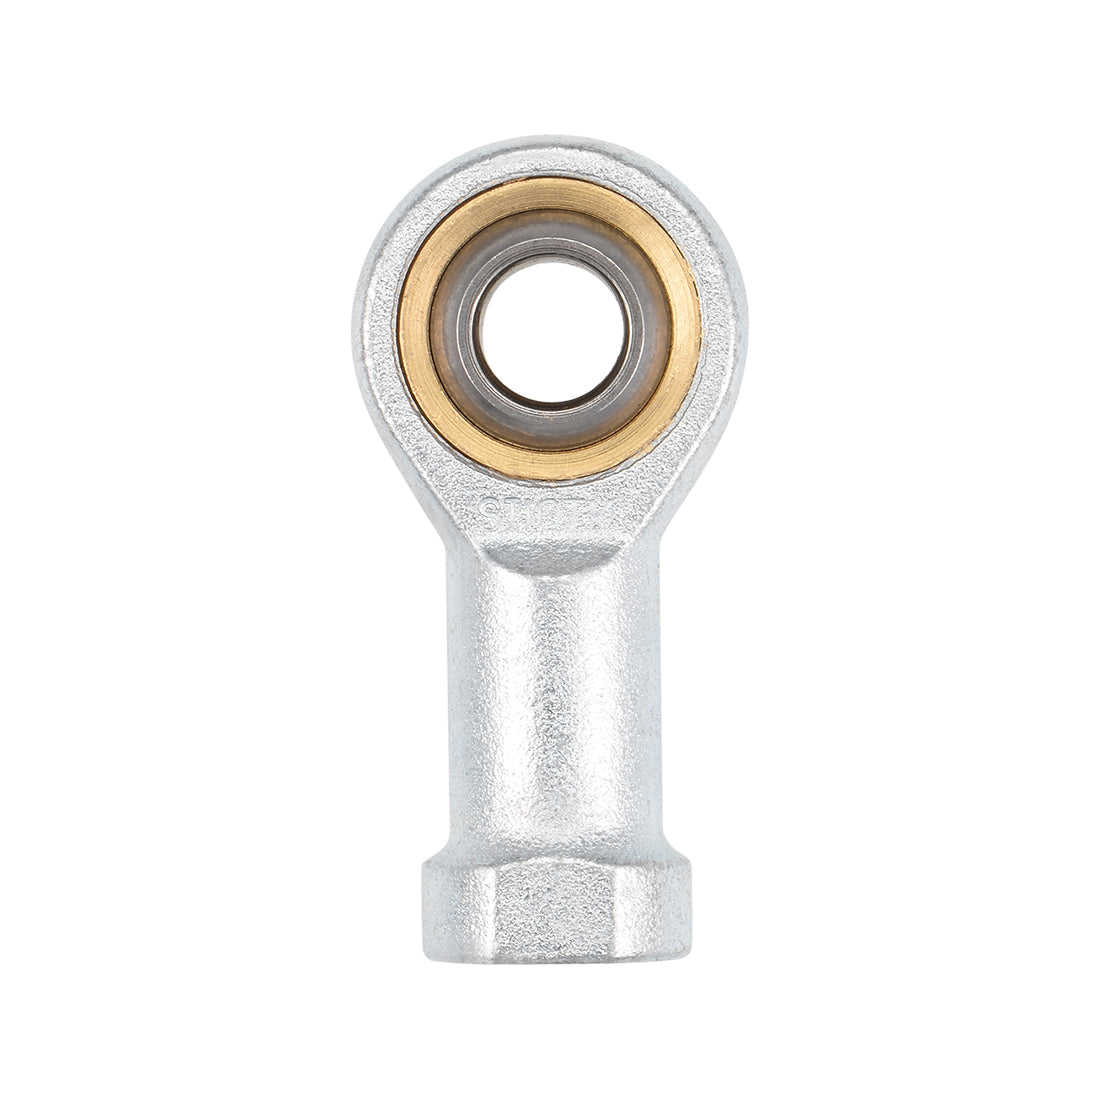 uxcell Uxcell 10mm Rod End Bearing M10x1.5mm Rod Ends Ball Joint Female Right Hand Thread